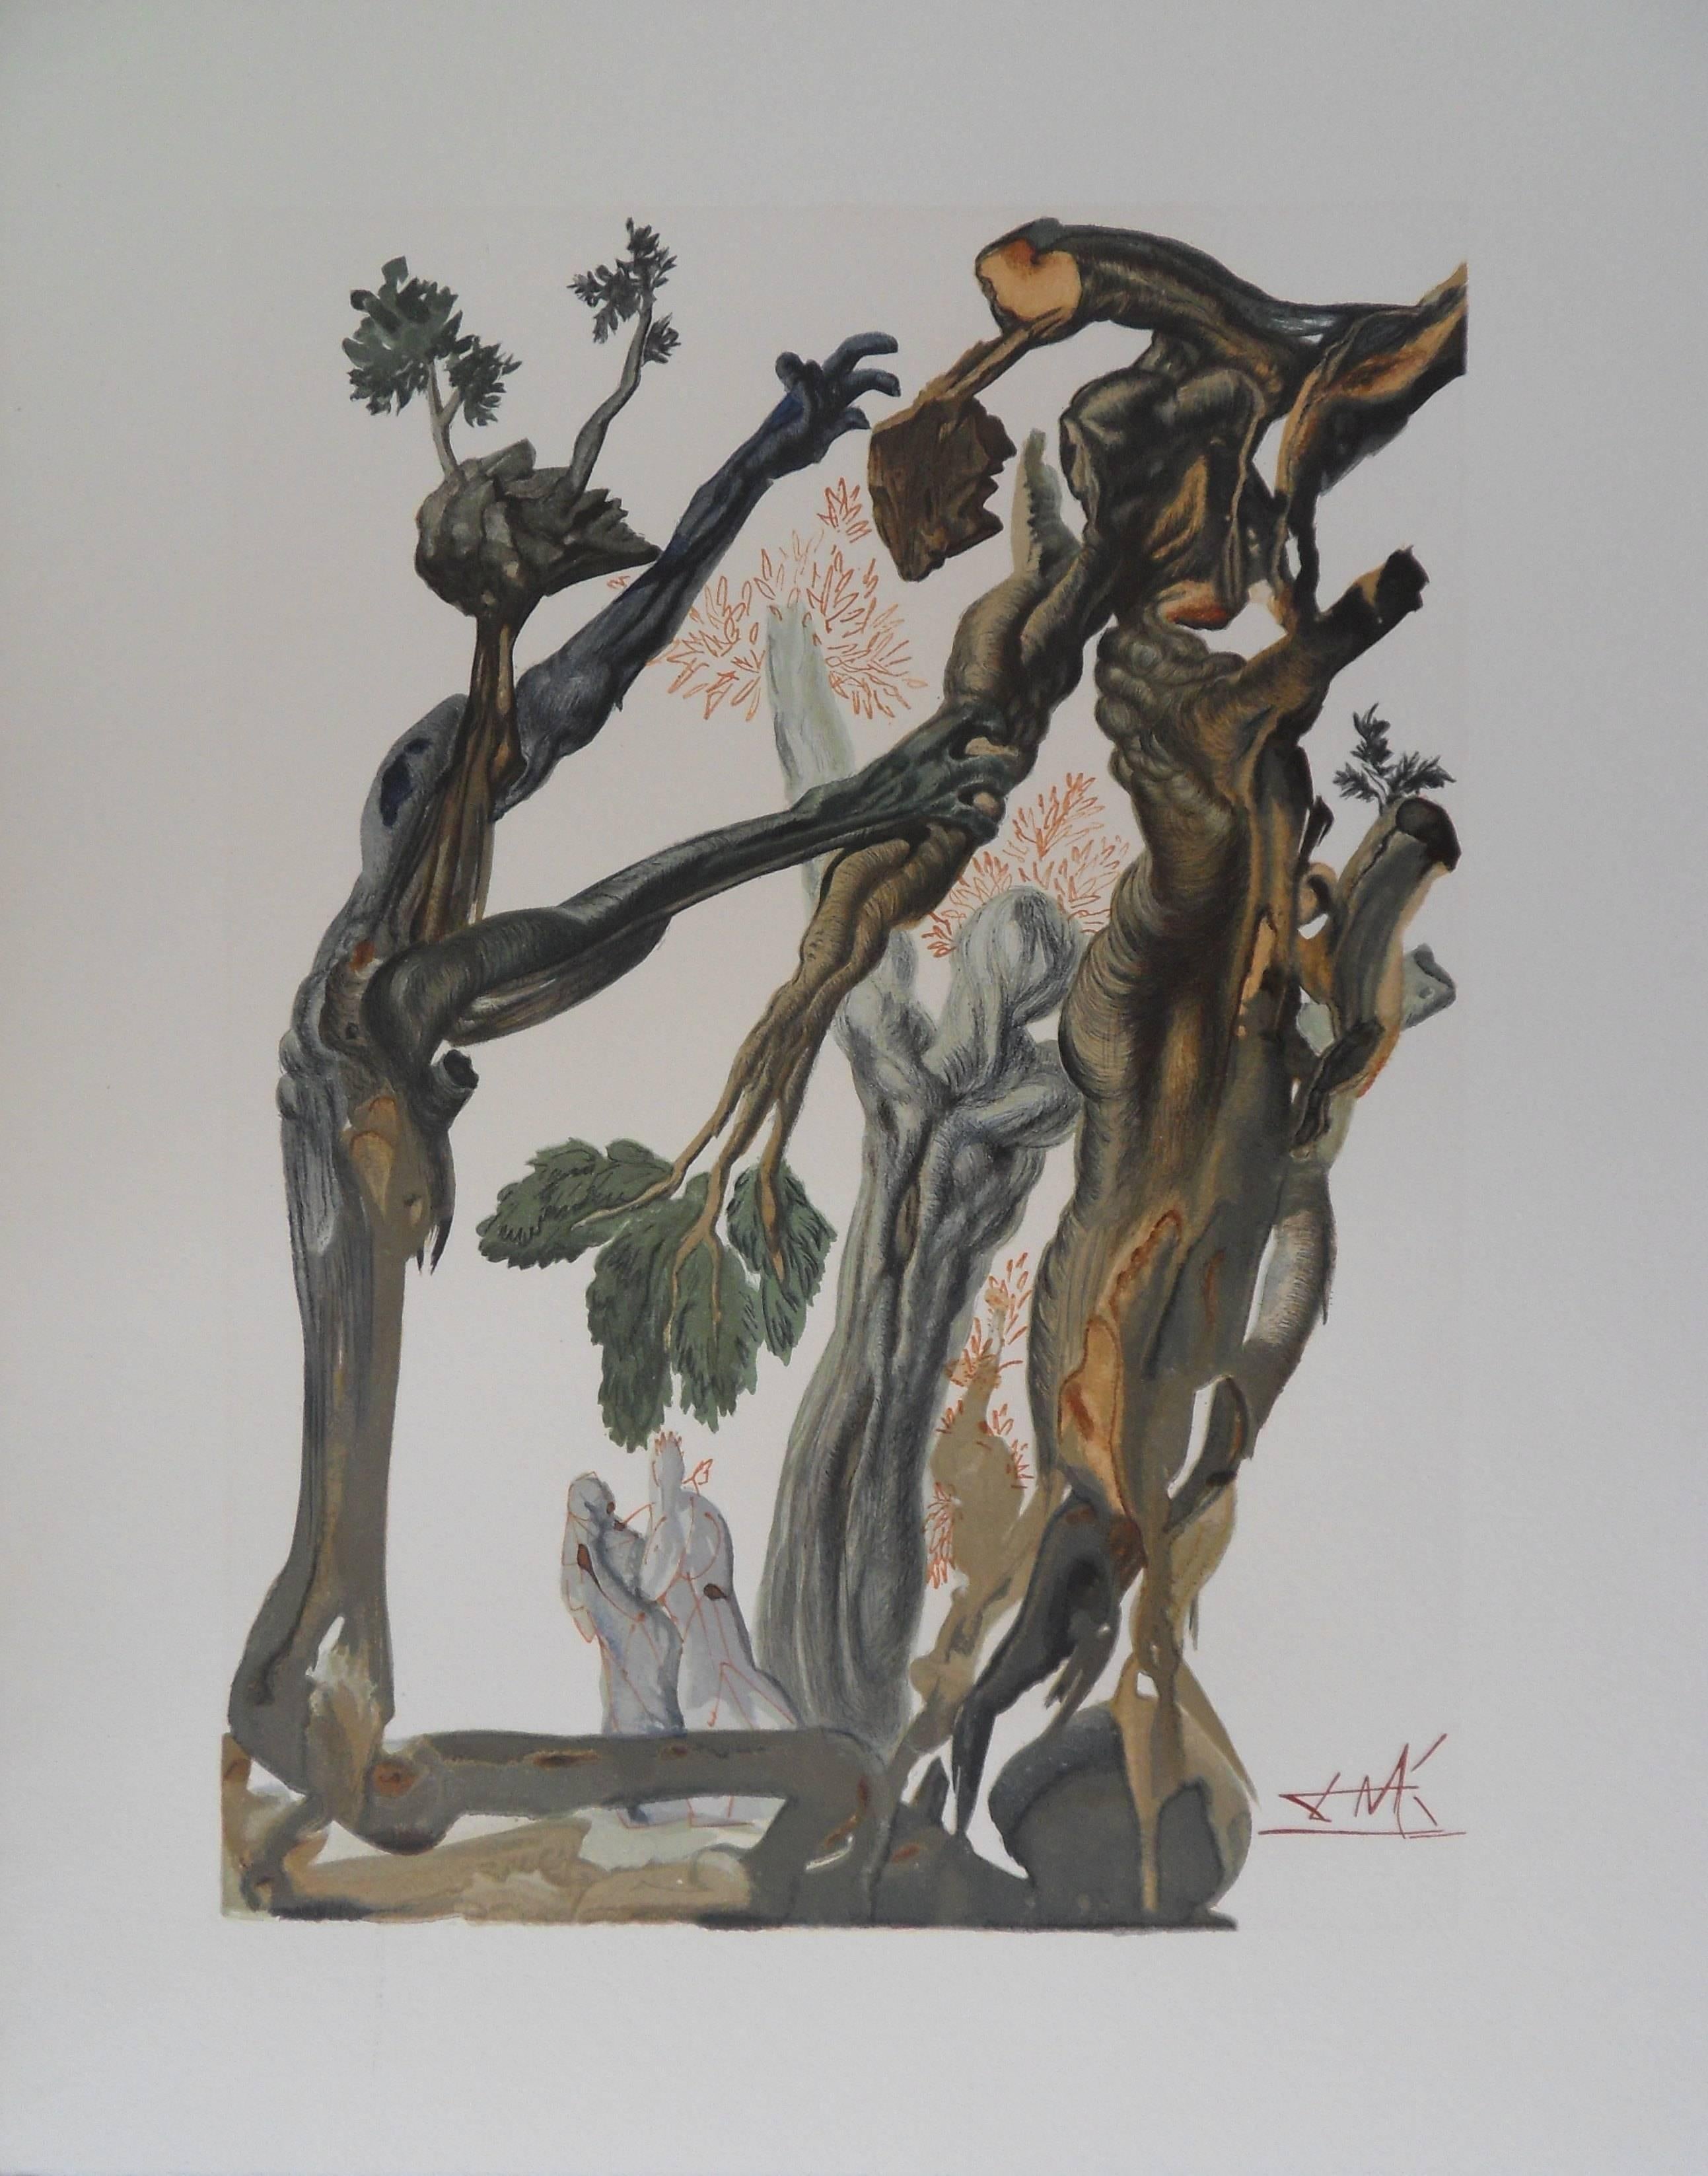 Salvador Dalí Figurative Print - Hell 13 - The Forest of suicides - woodcut - 1963 (Field p. 189)